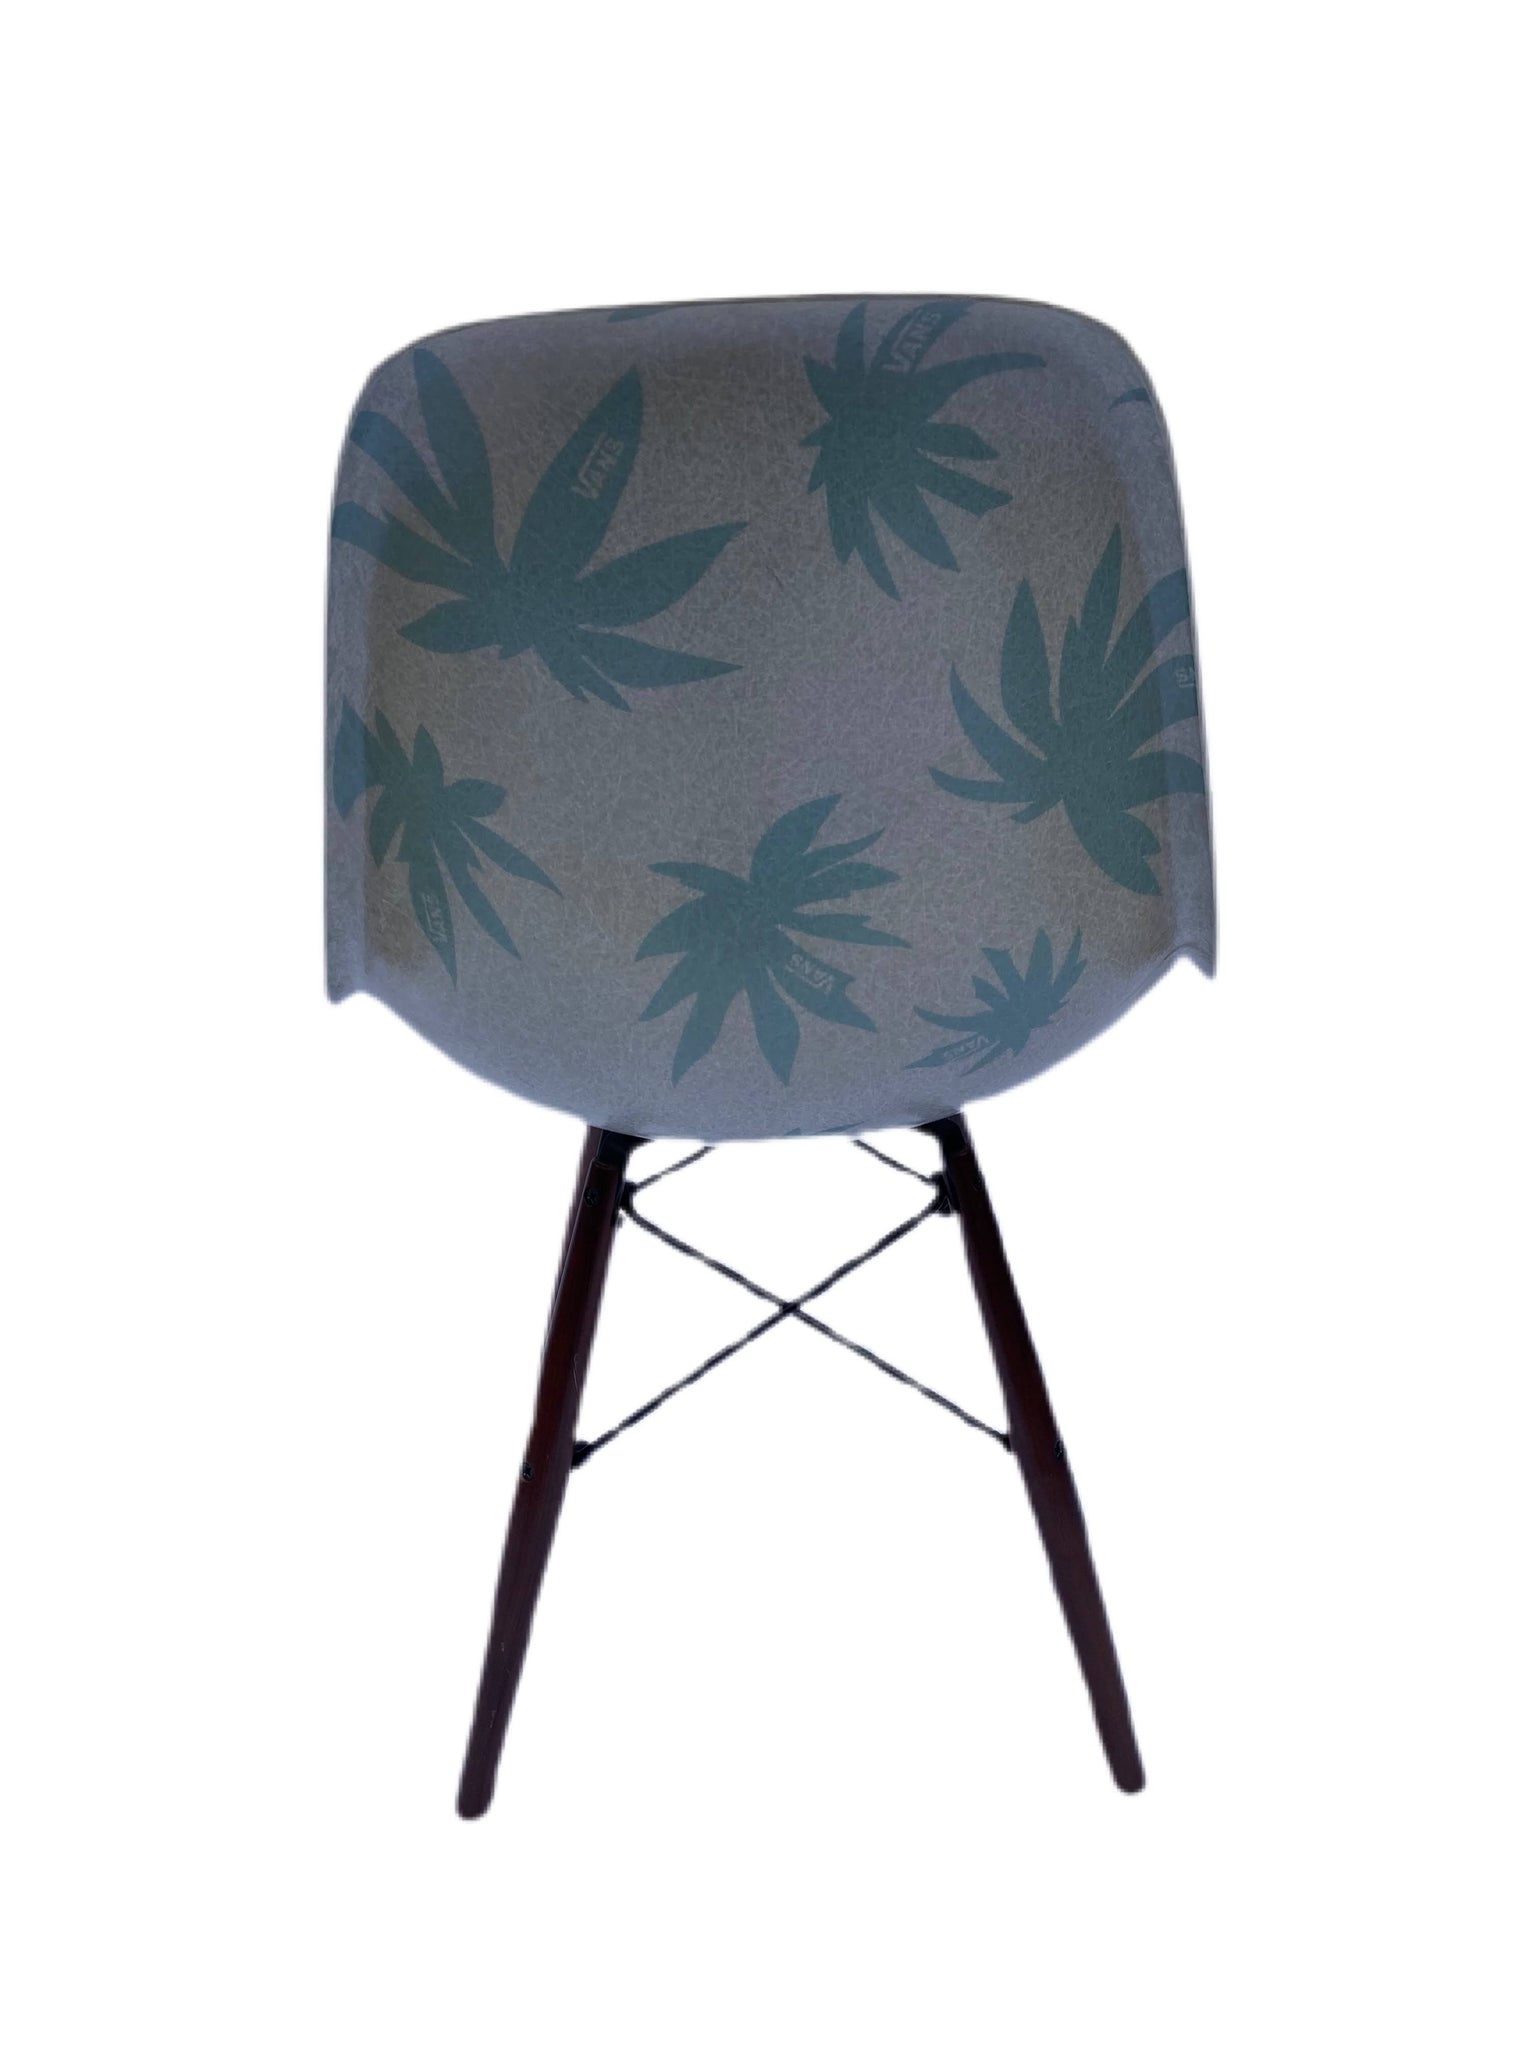 Modernica x Vans Limited Edition 3-Piece Chair Set – Acme Mid 